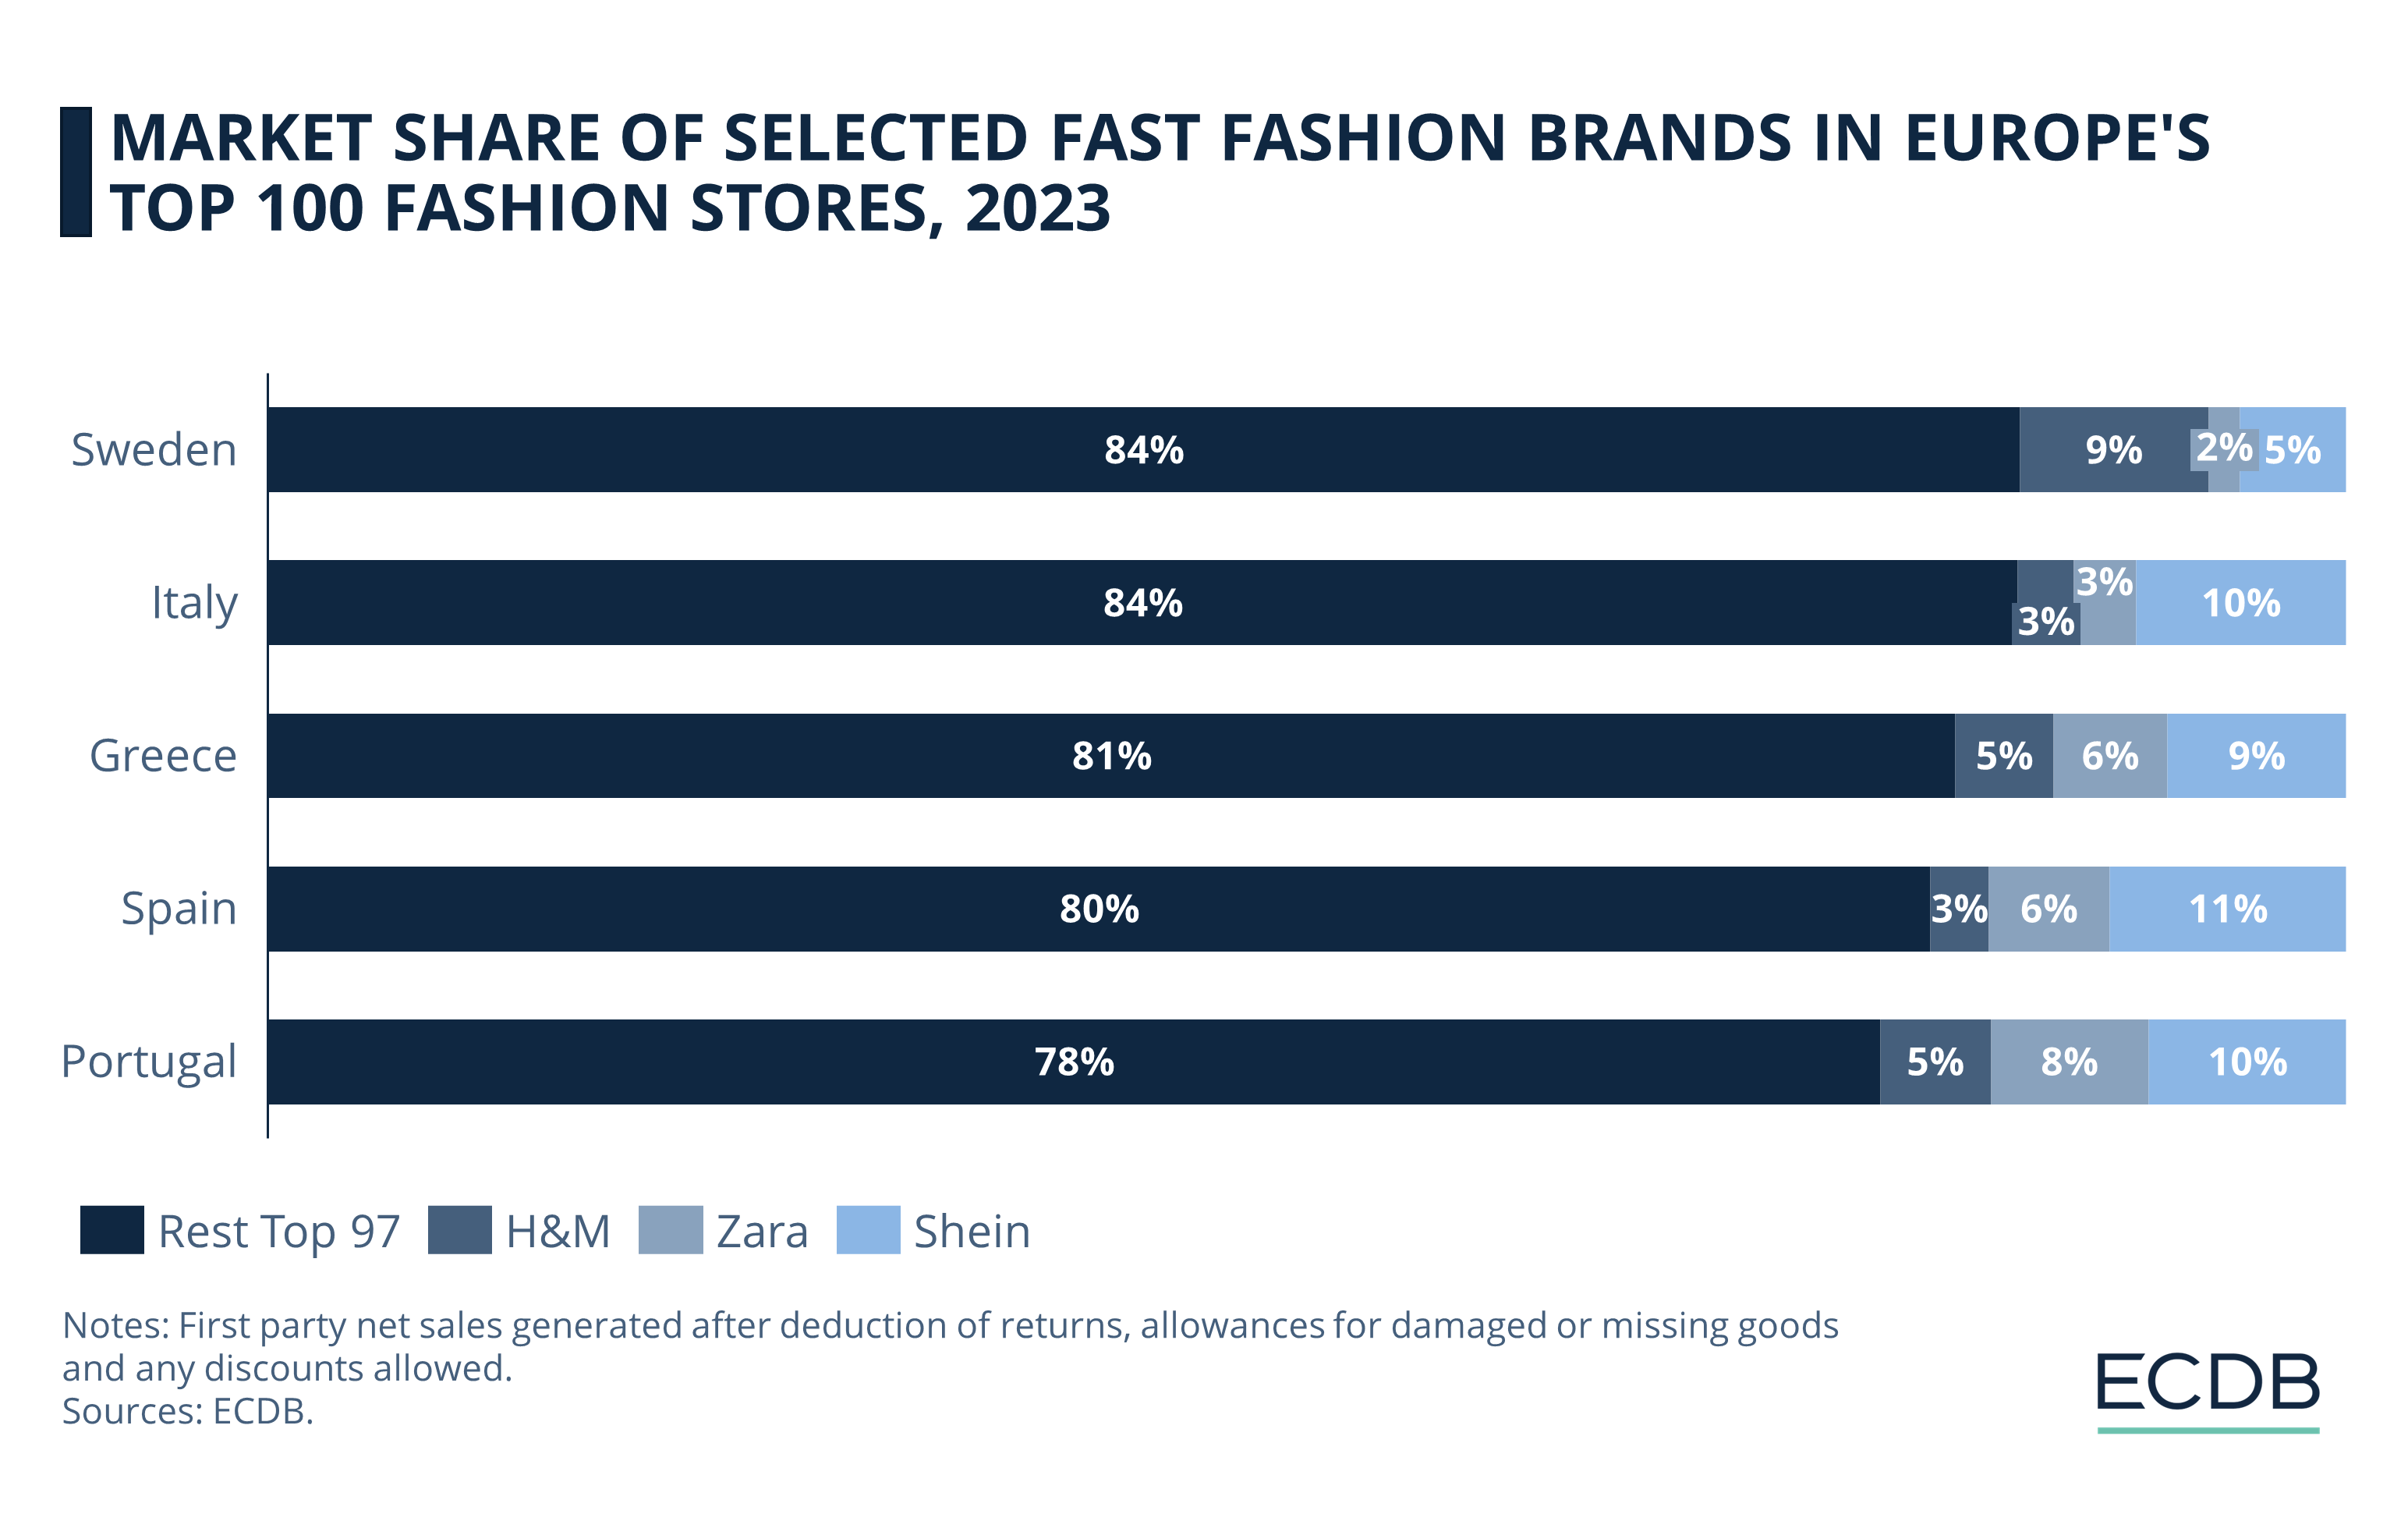 Zara is most searched for fashion brand globally - report